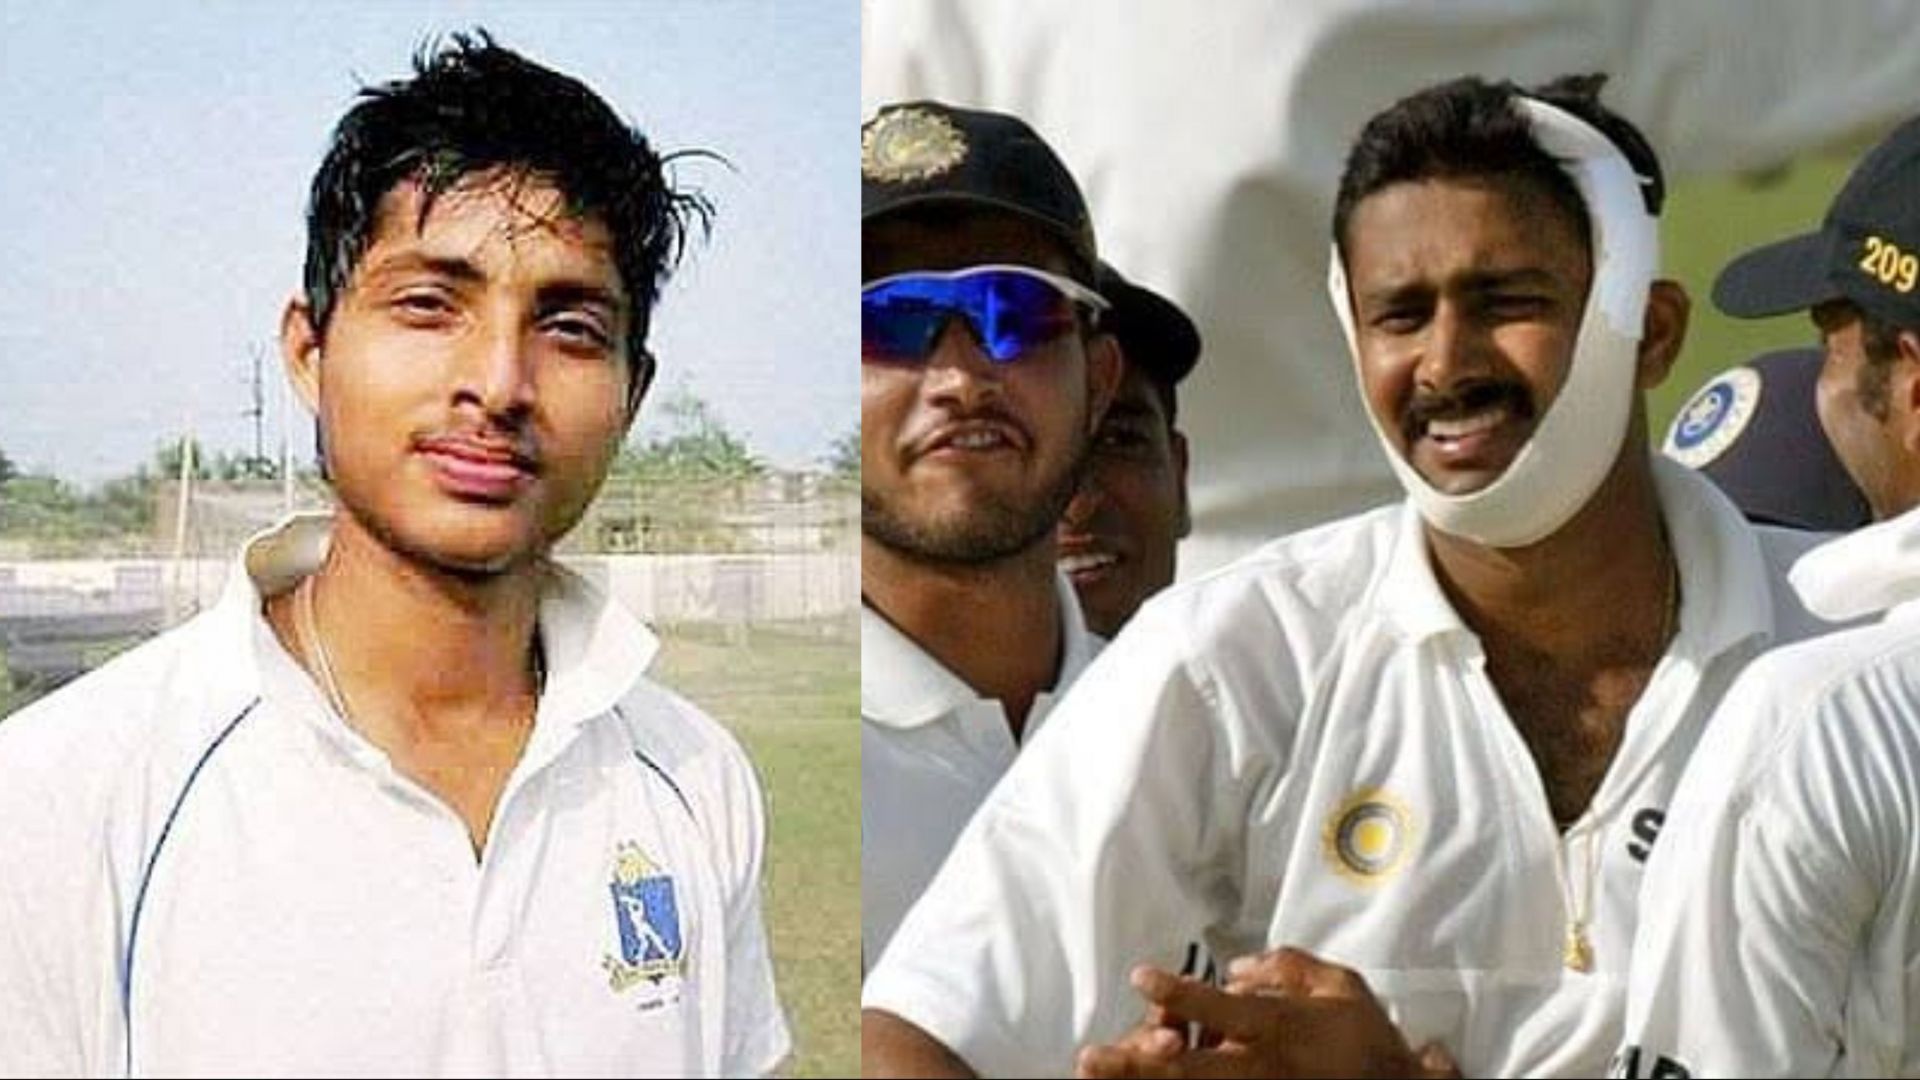 Ankit Keshri (L) and Anil Kumble are two Indian cricketers who suffered nasty injuries on the field (Image: Sportskeeda)